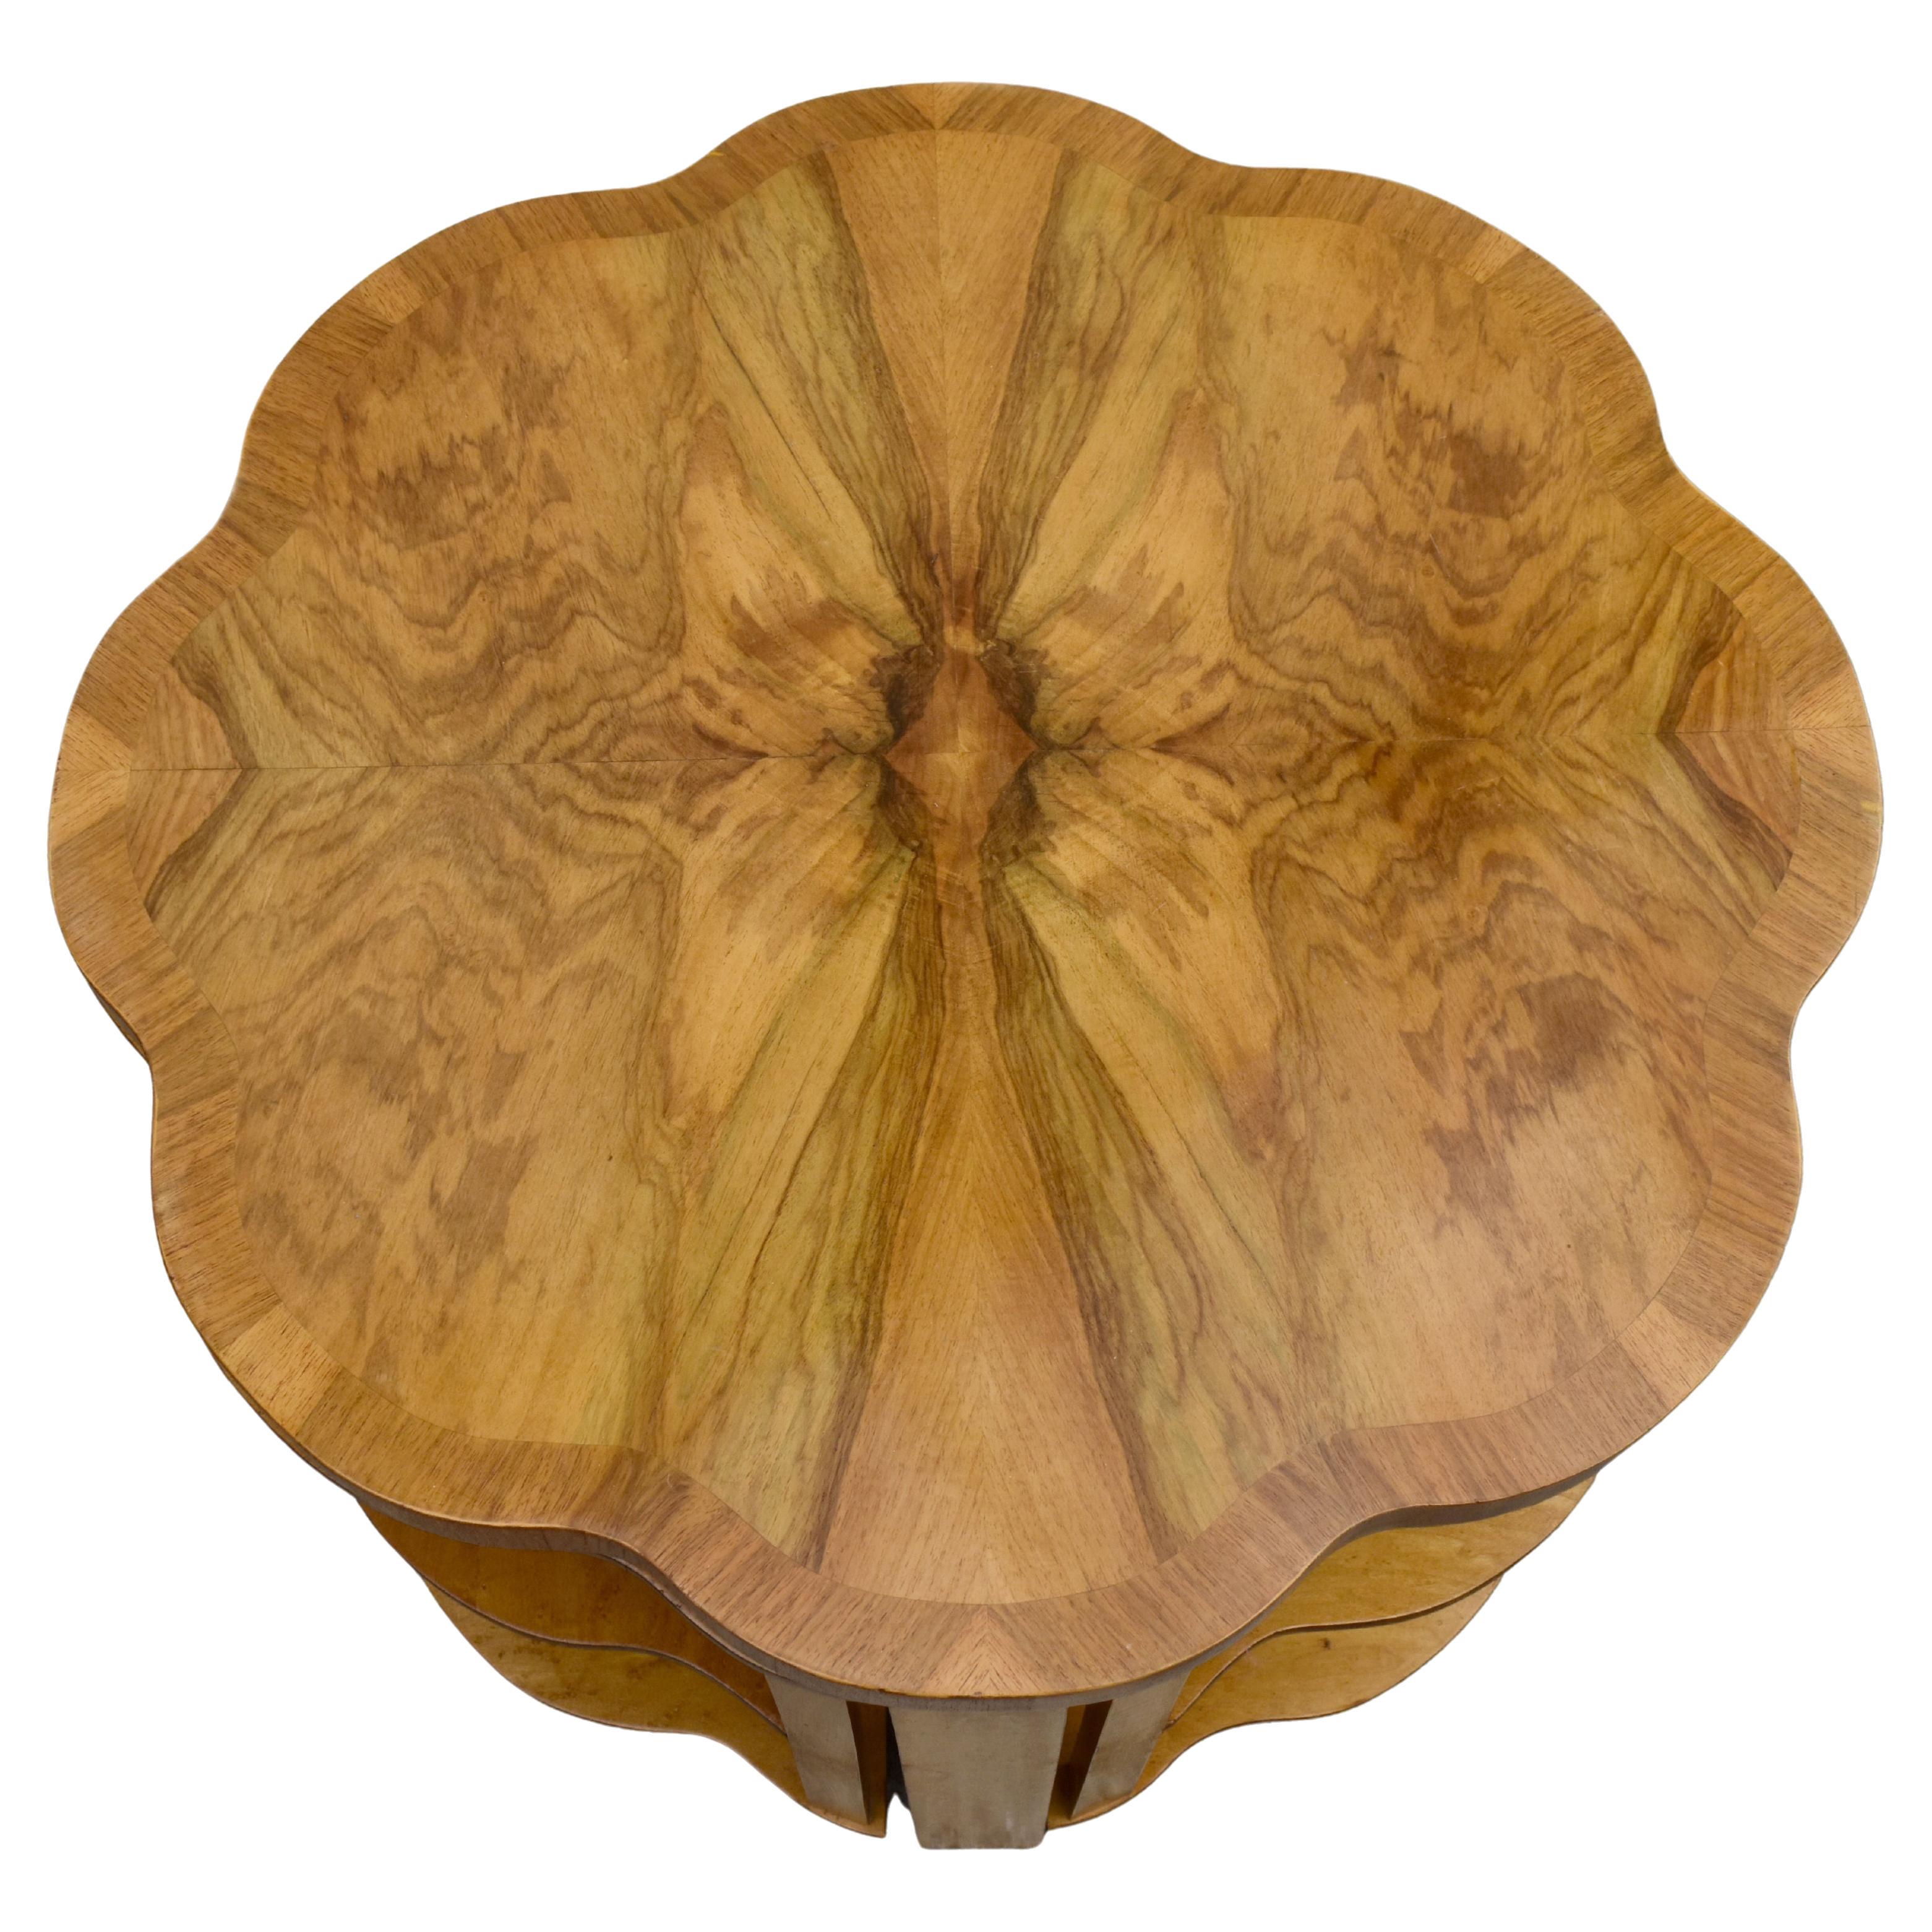 Art Deco High Quality Walnut & Maple Nest of 5 Tables by Epstein, English, 1930 For Sale 3